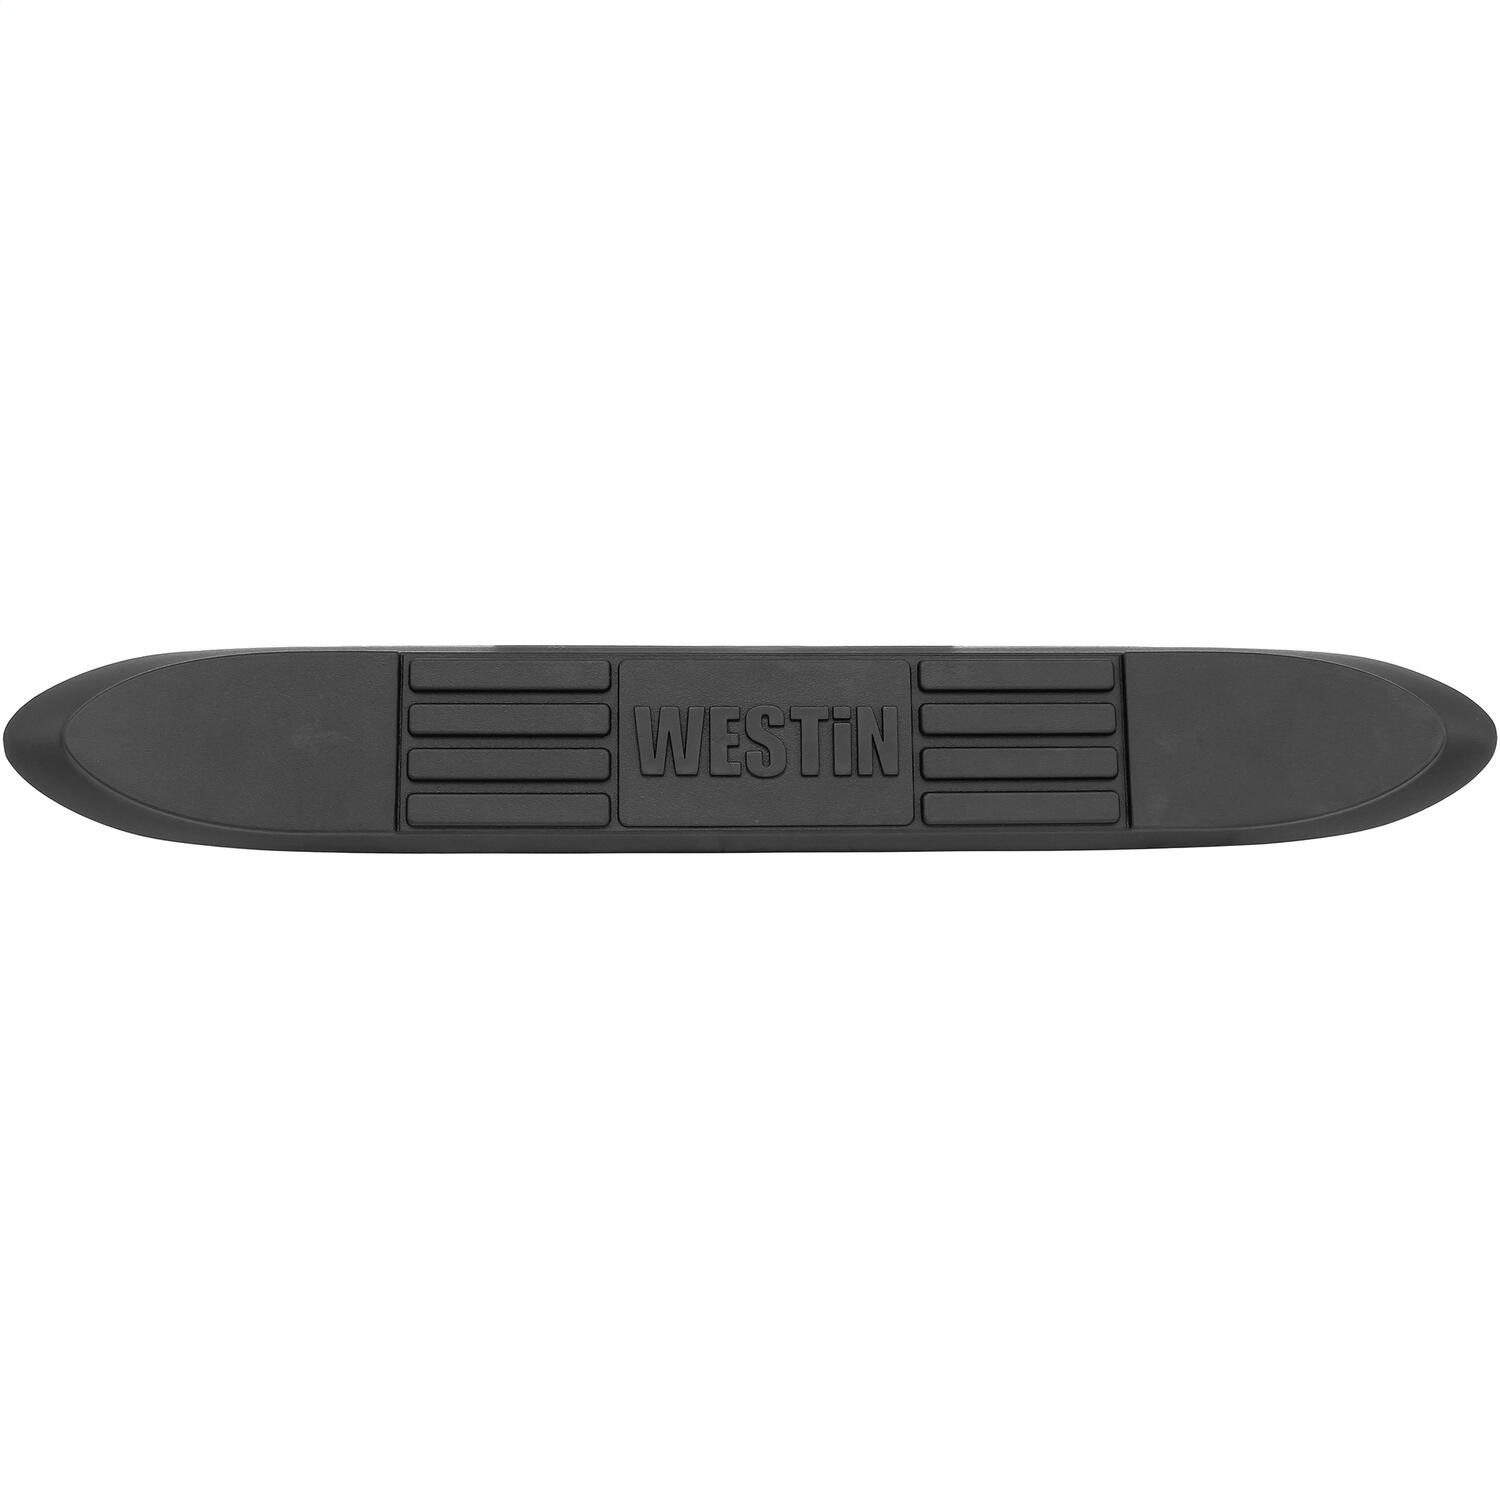 Westin 23-0001 E-Series 3 Replacement Step Pad Kit